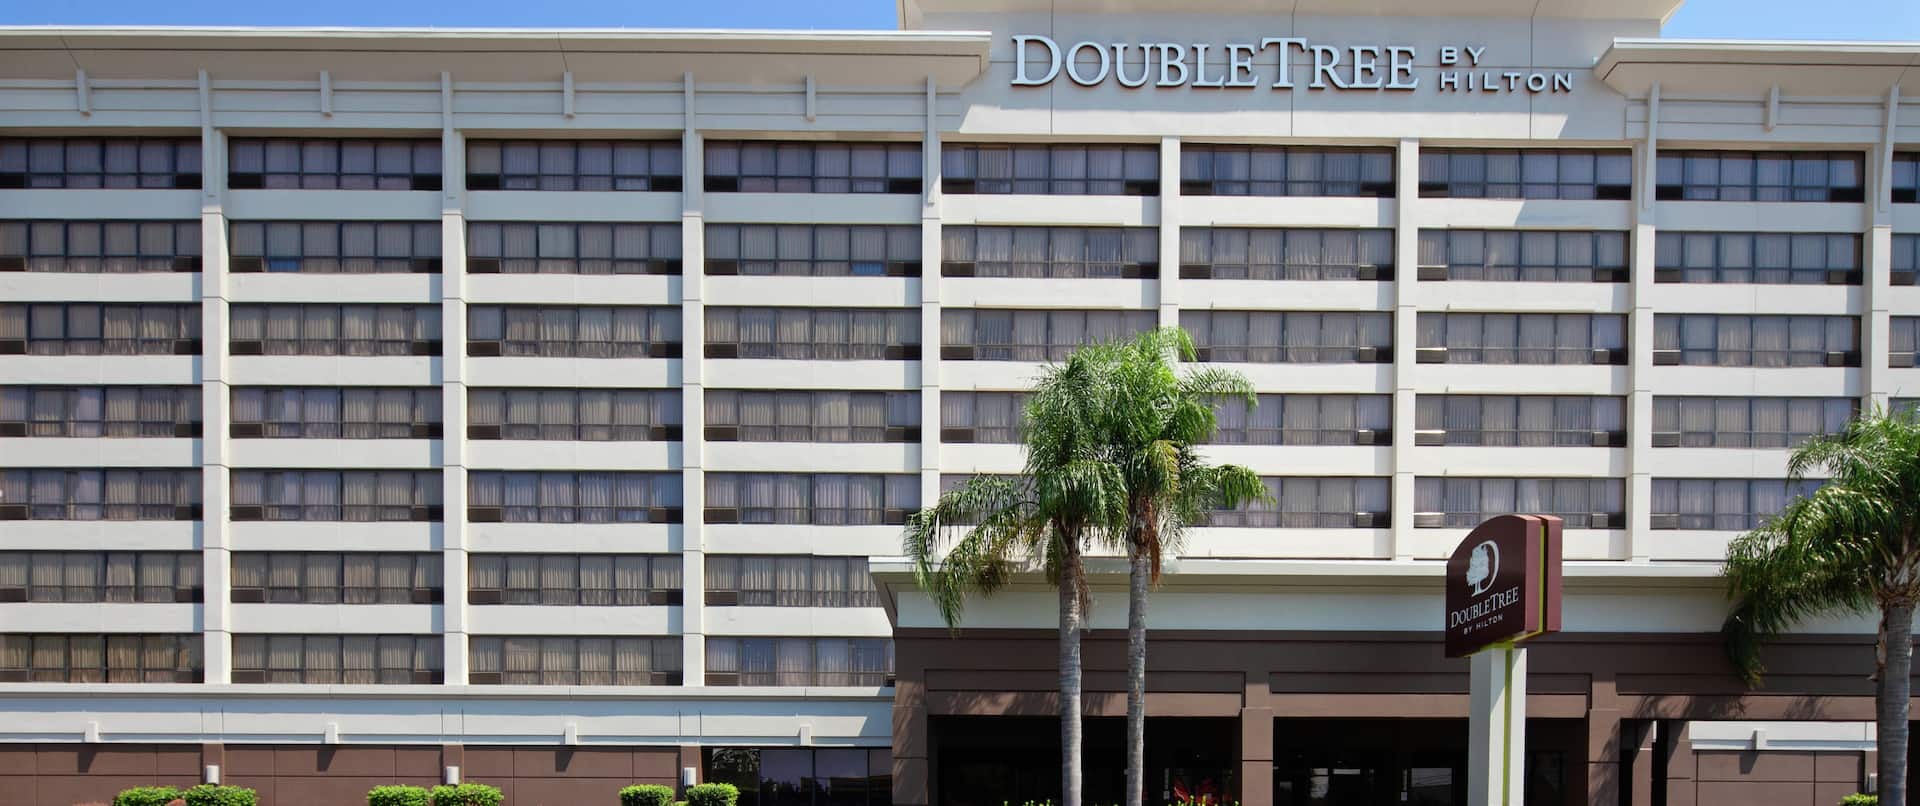 Photo of DoubleTree by Hilton Hotel New Orleans Airport, Kenner, LA